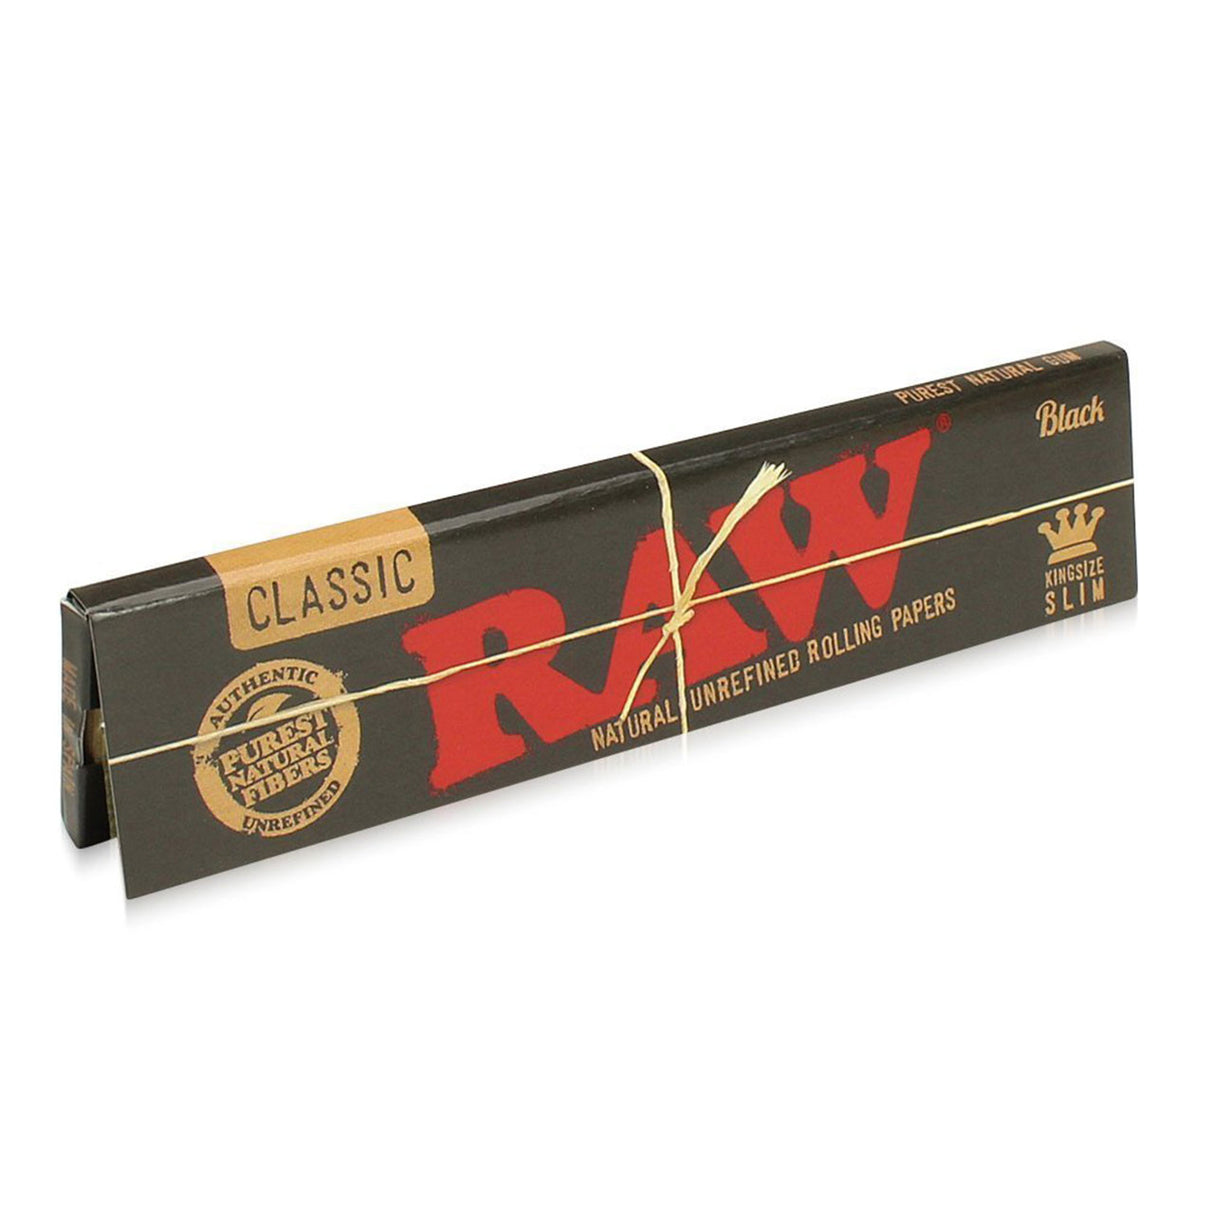 Box of King Size Slim Classic Black RAW Rolling Papers